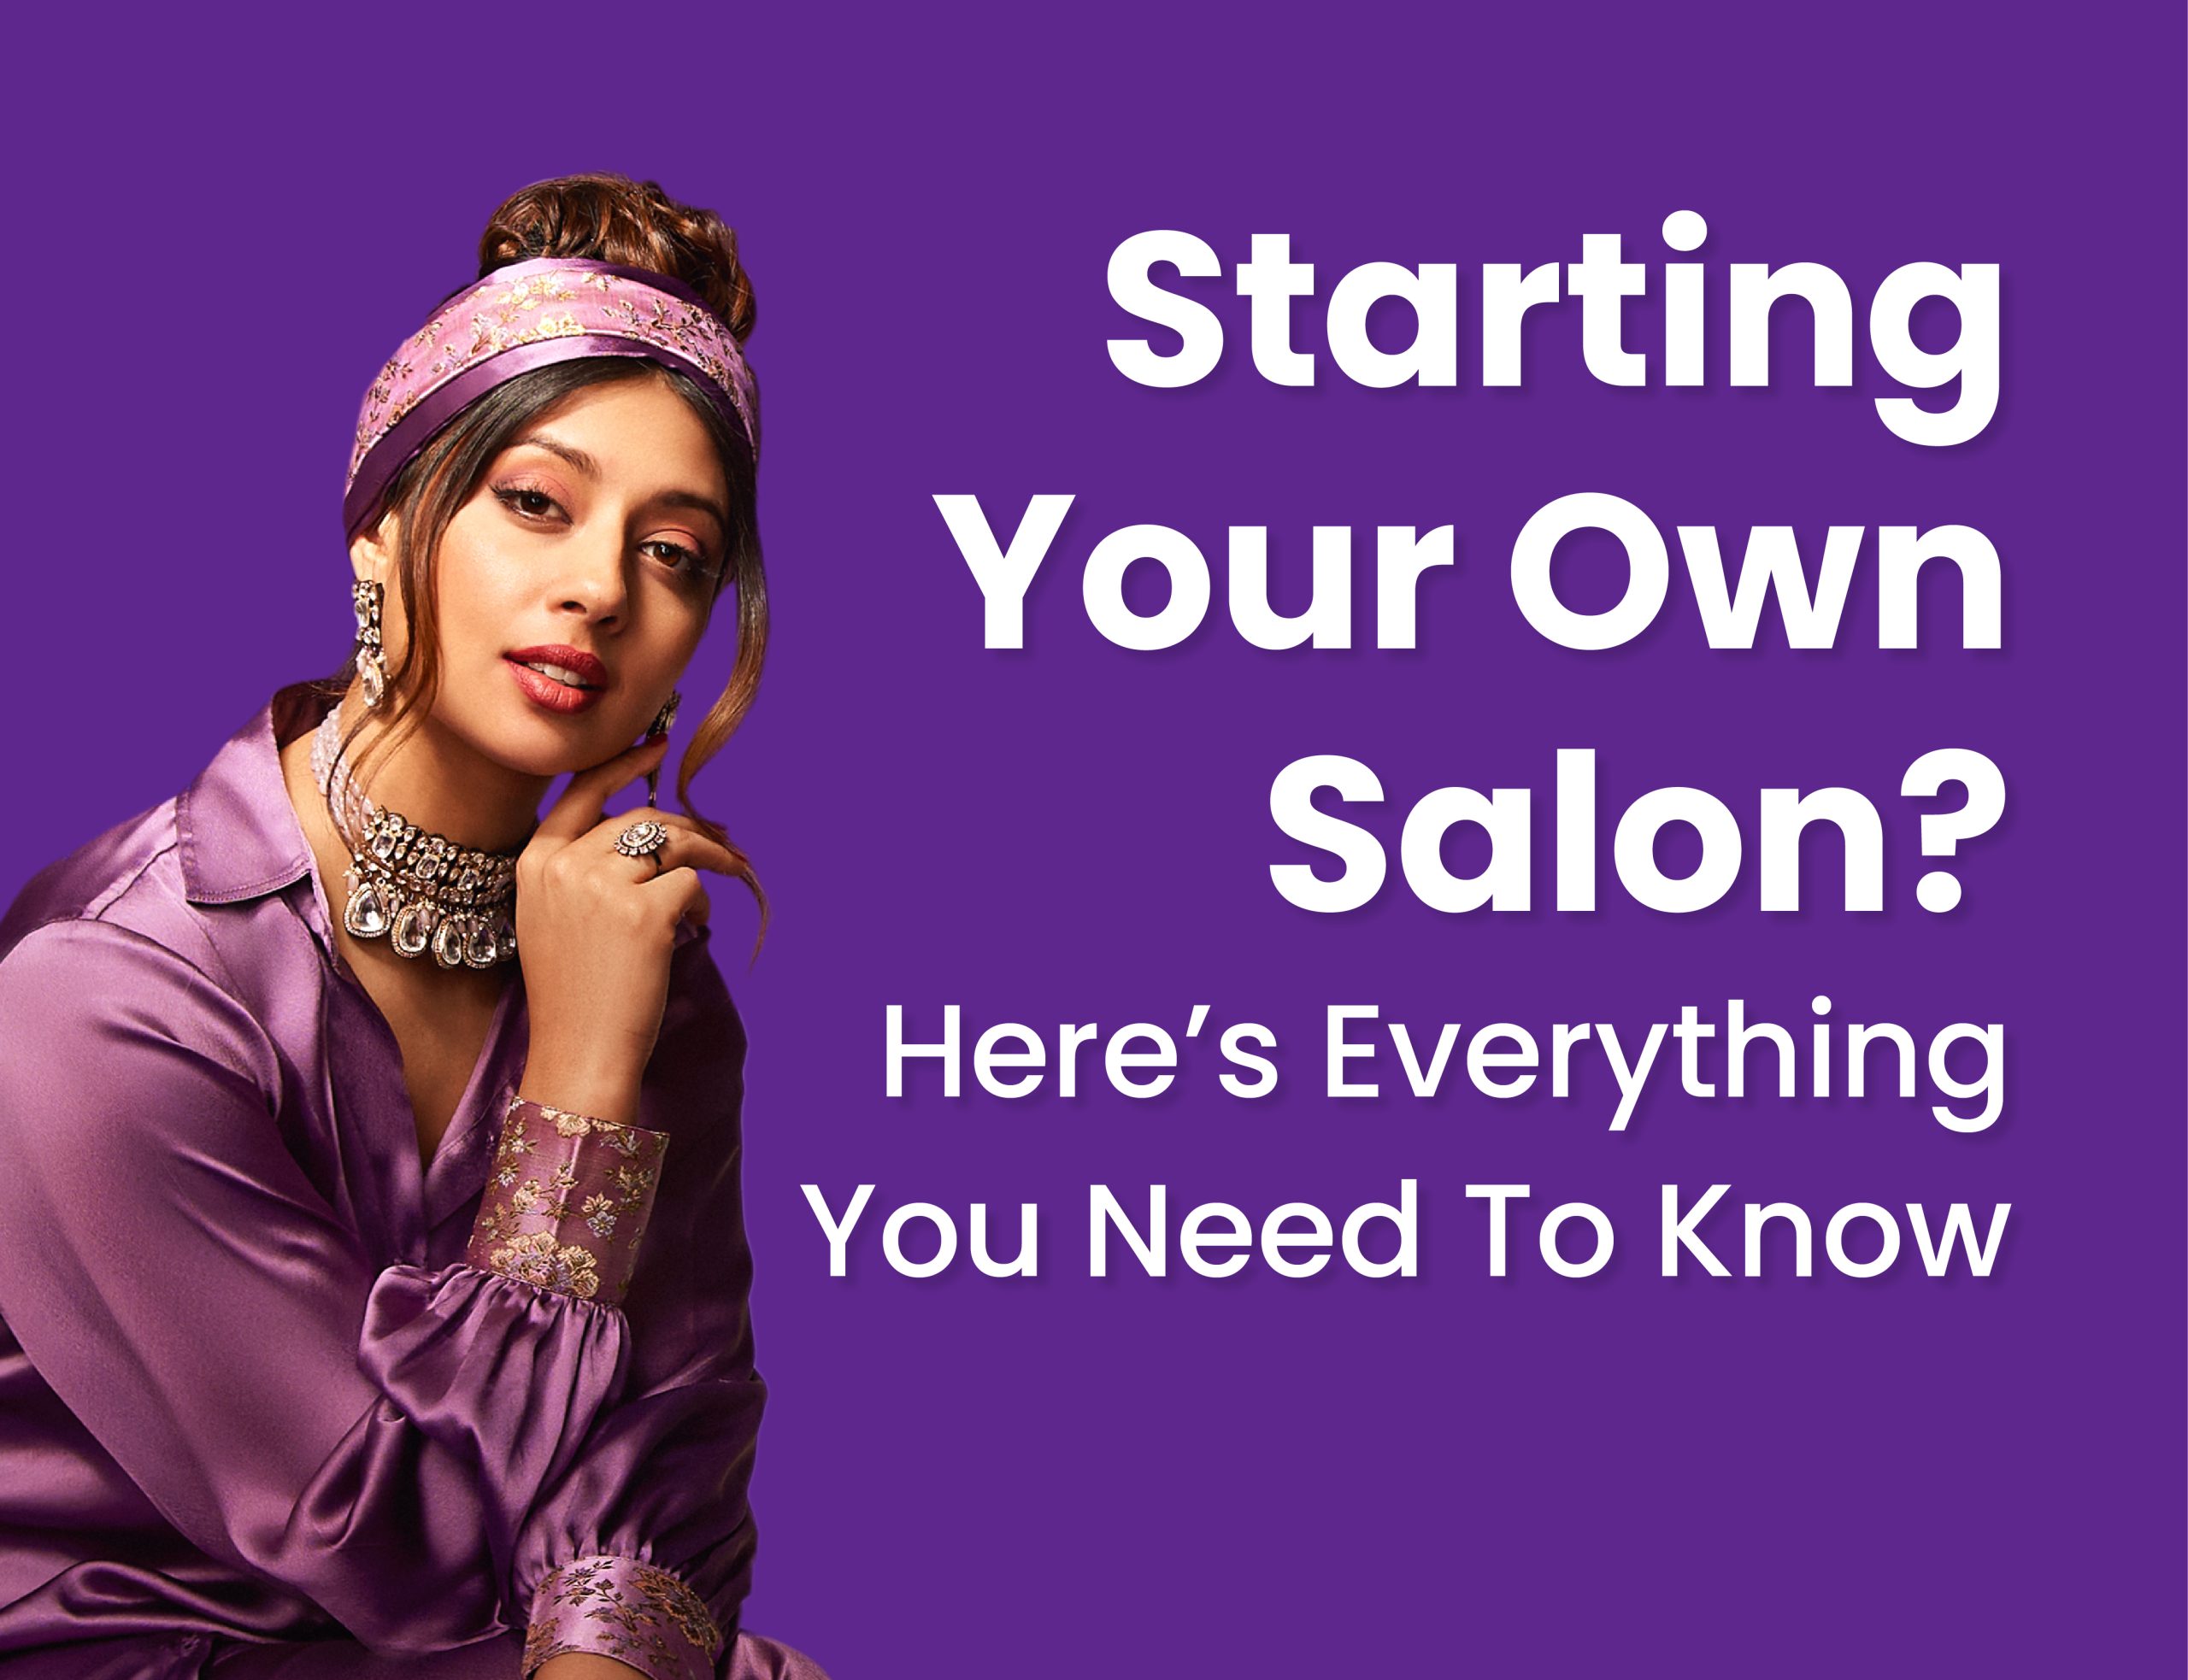 Starting Your Own Salon? Here’s Everything You Need To Know